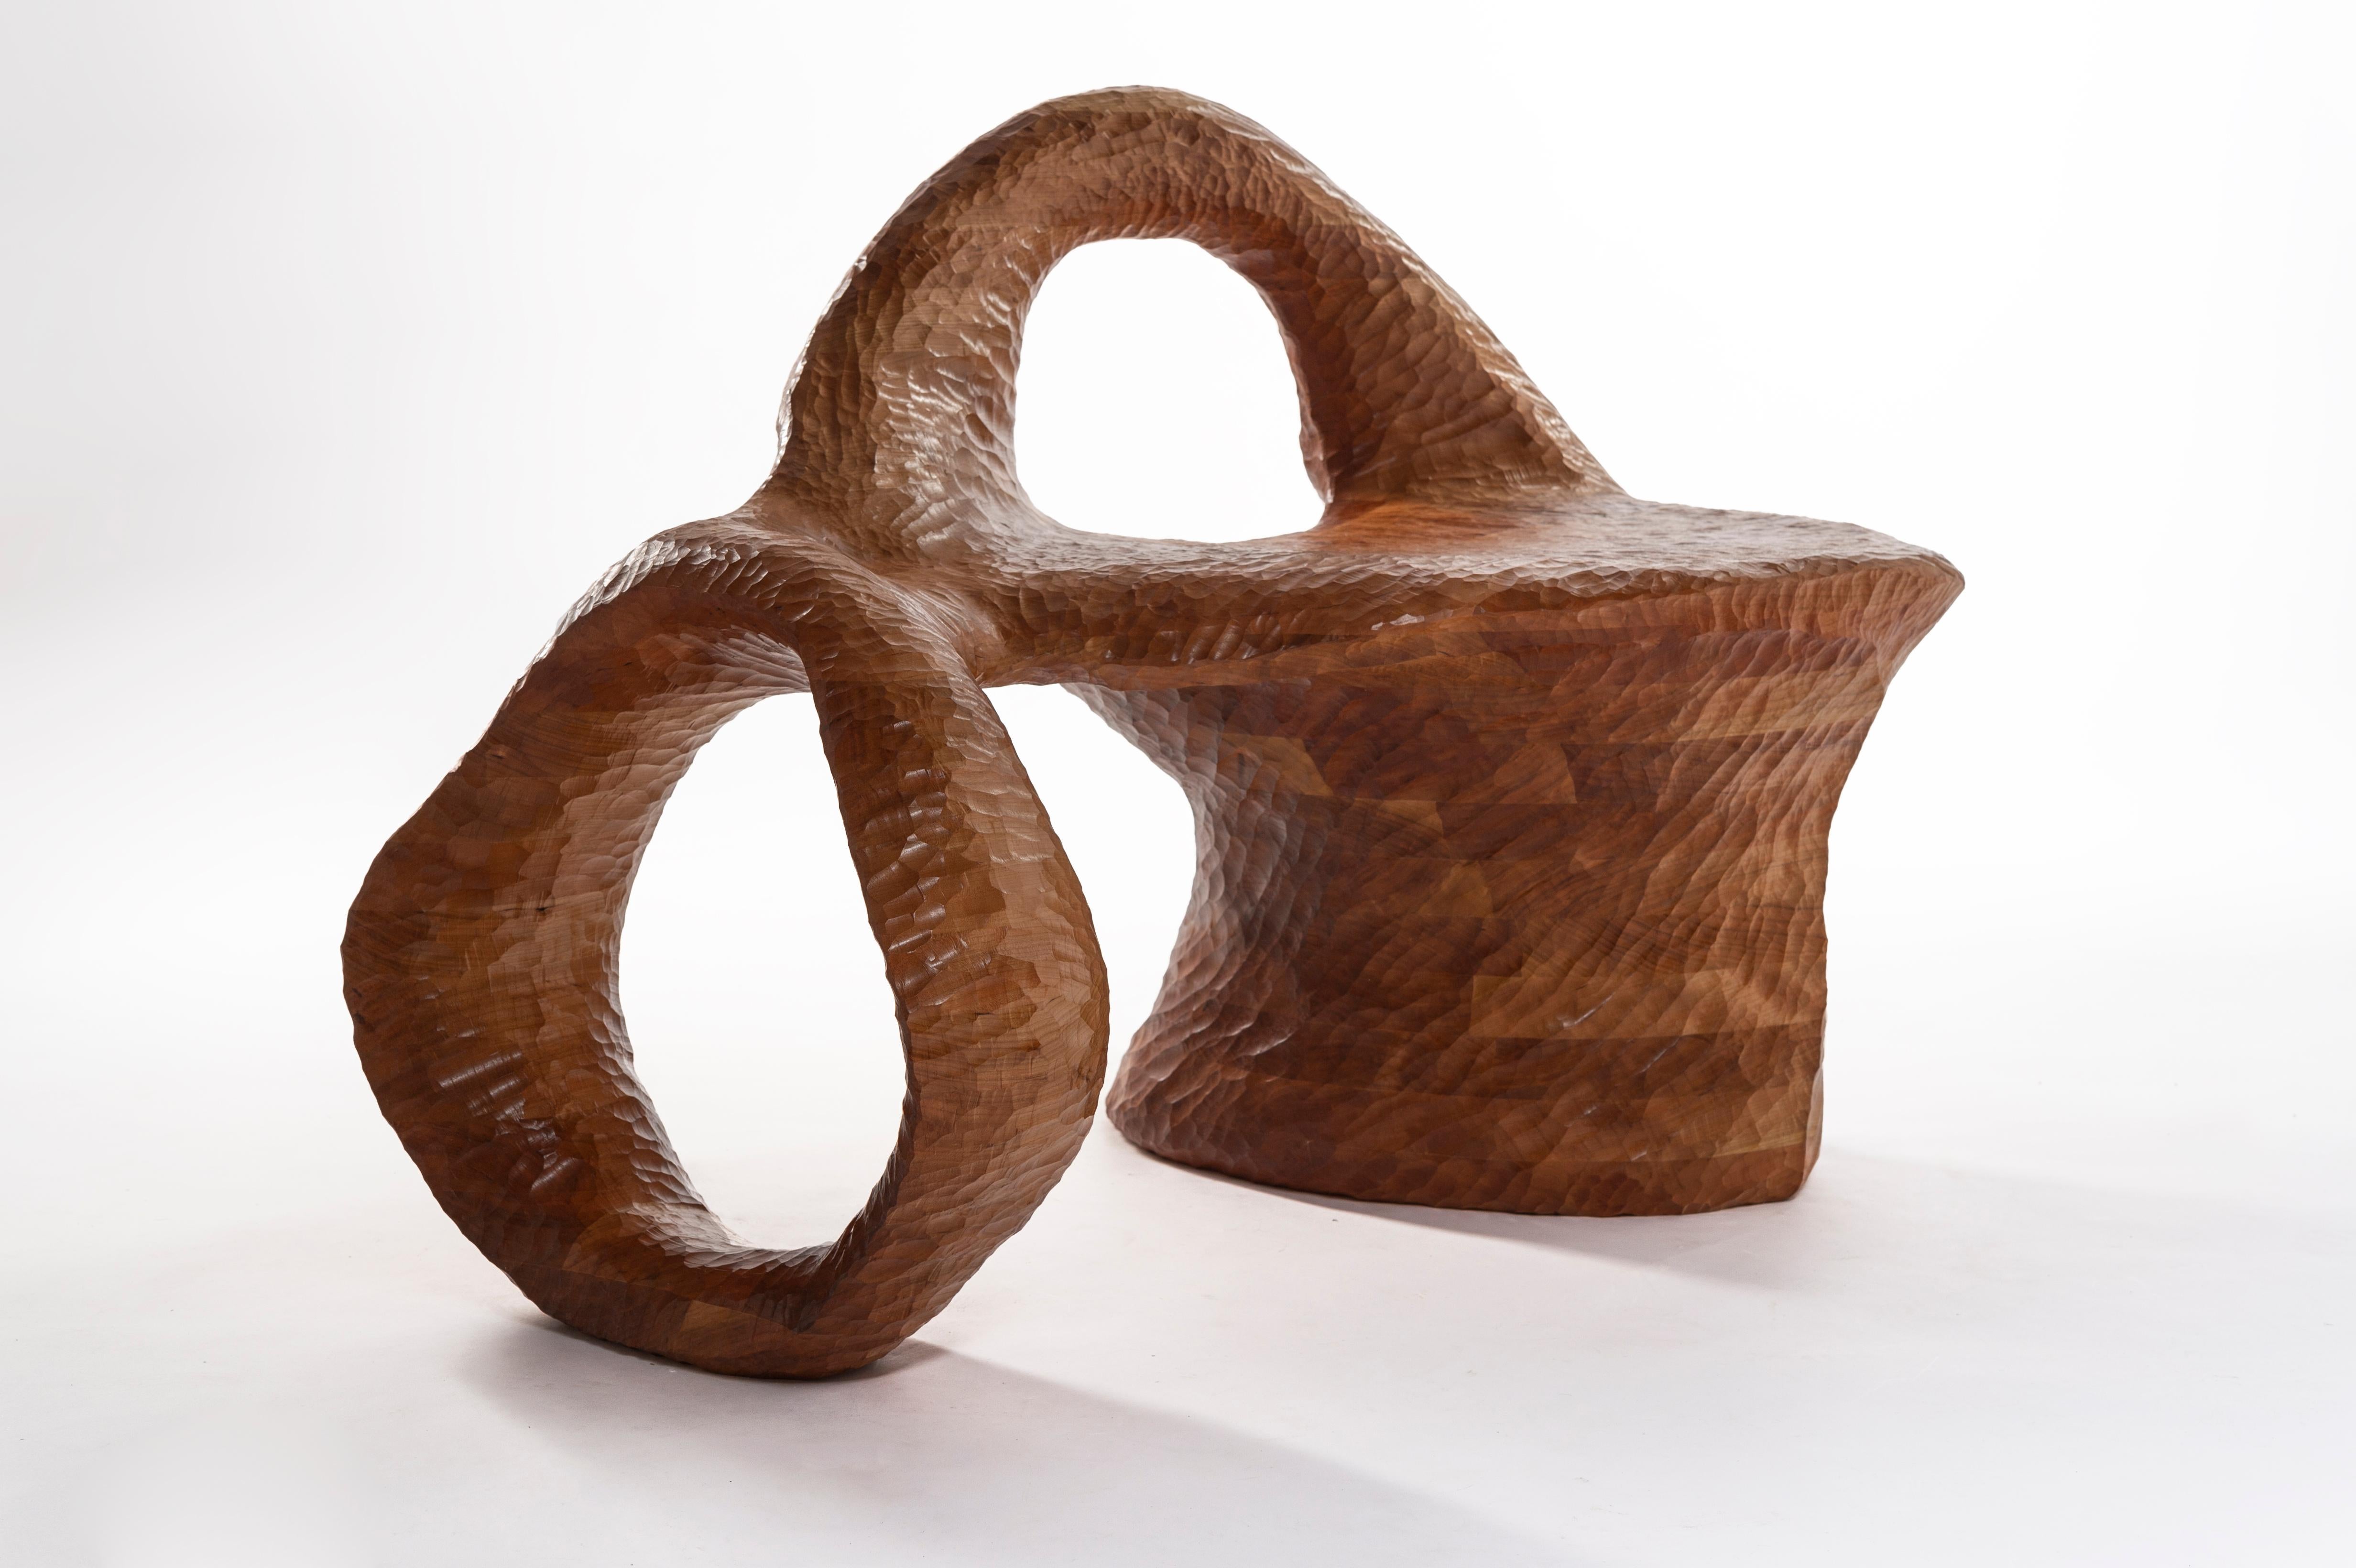 Jared Abner Abstract Sculpture - Chair, Carved wood sculpture